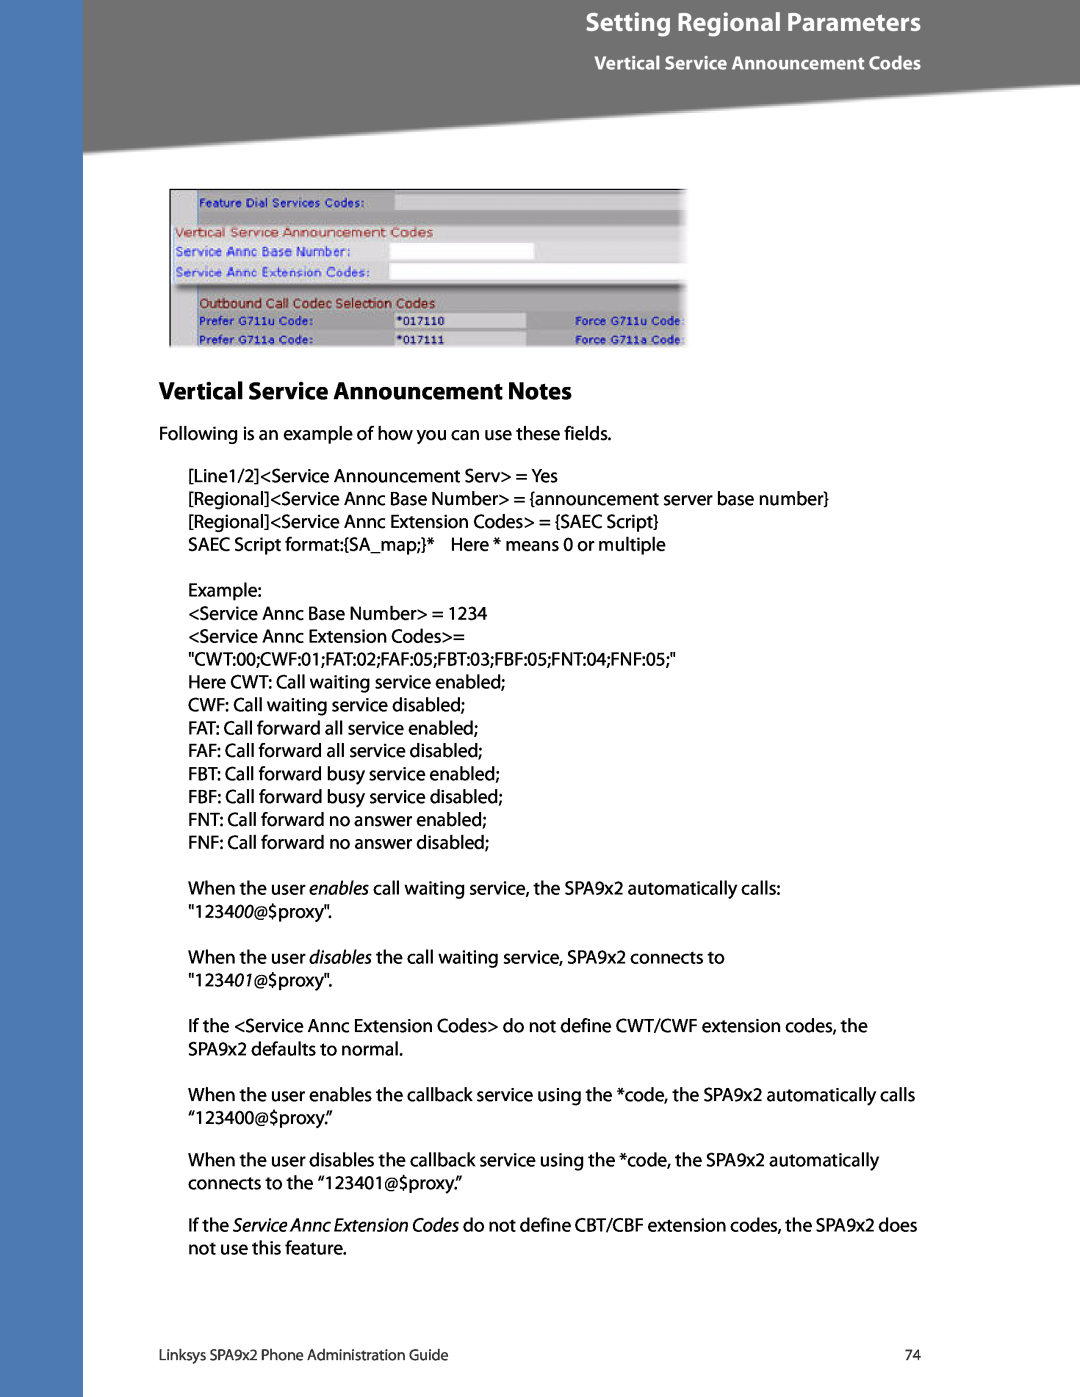 Linksys SPA942 manual Vertical Service Announcement Notes, Setting Regional Parameters, Vertical Service Announcement Codes 